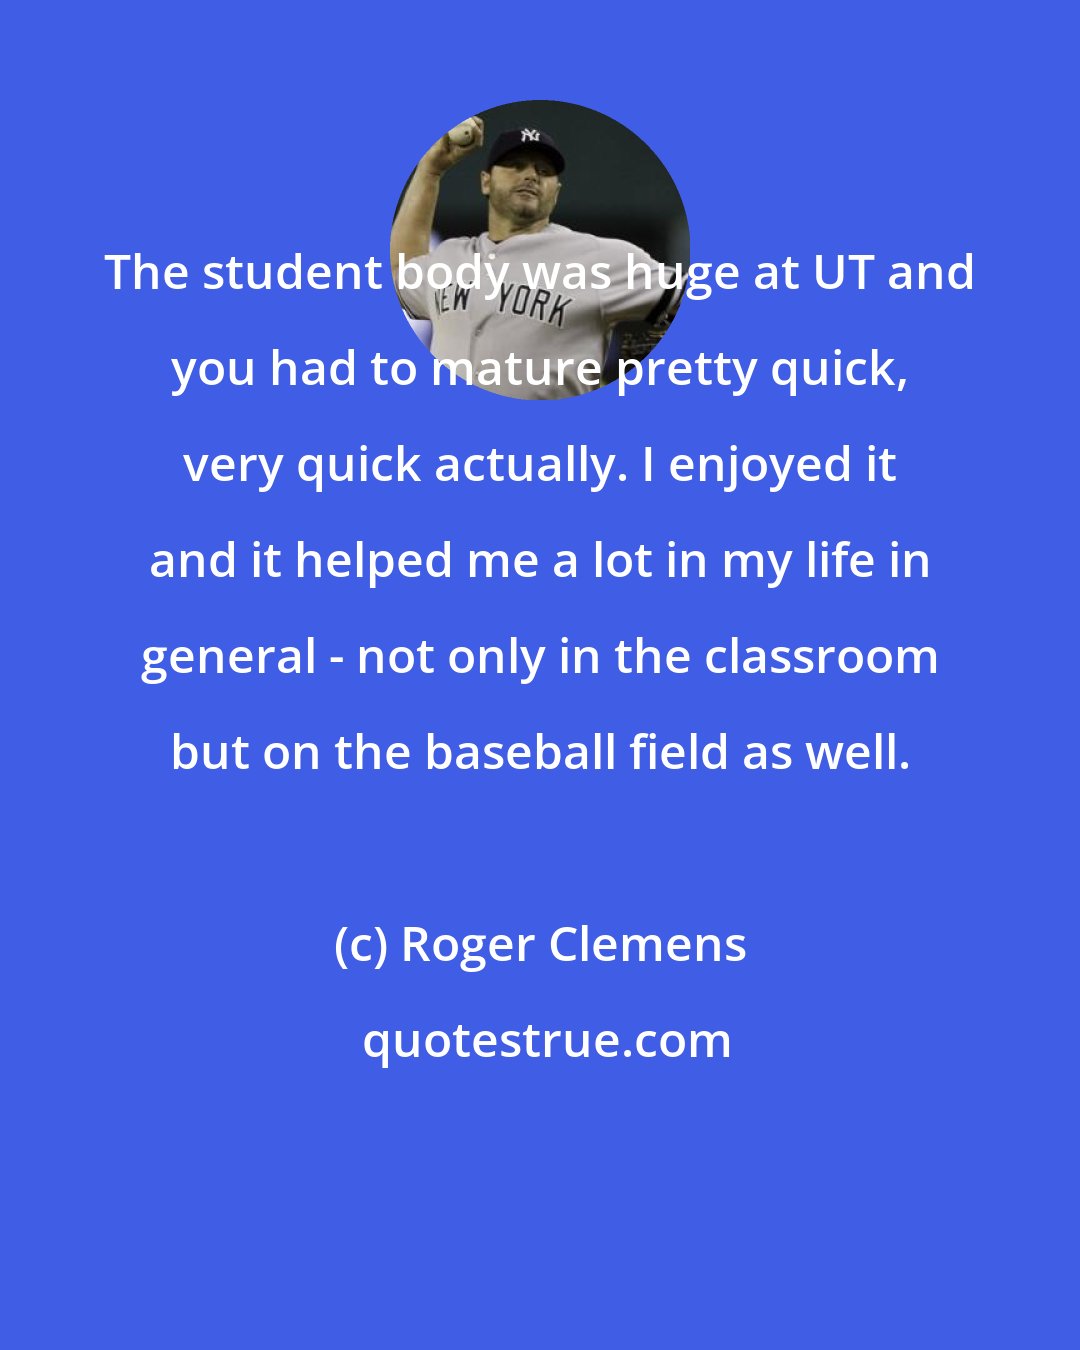 Roger Clemens: The student body was huge at UT and you had to mature pretty quick, very quick actually. I enjoyed it and it helped me a lot in my life in general - not only in the classroom but on the baseball field as well.